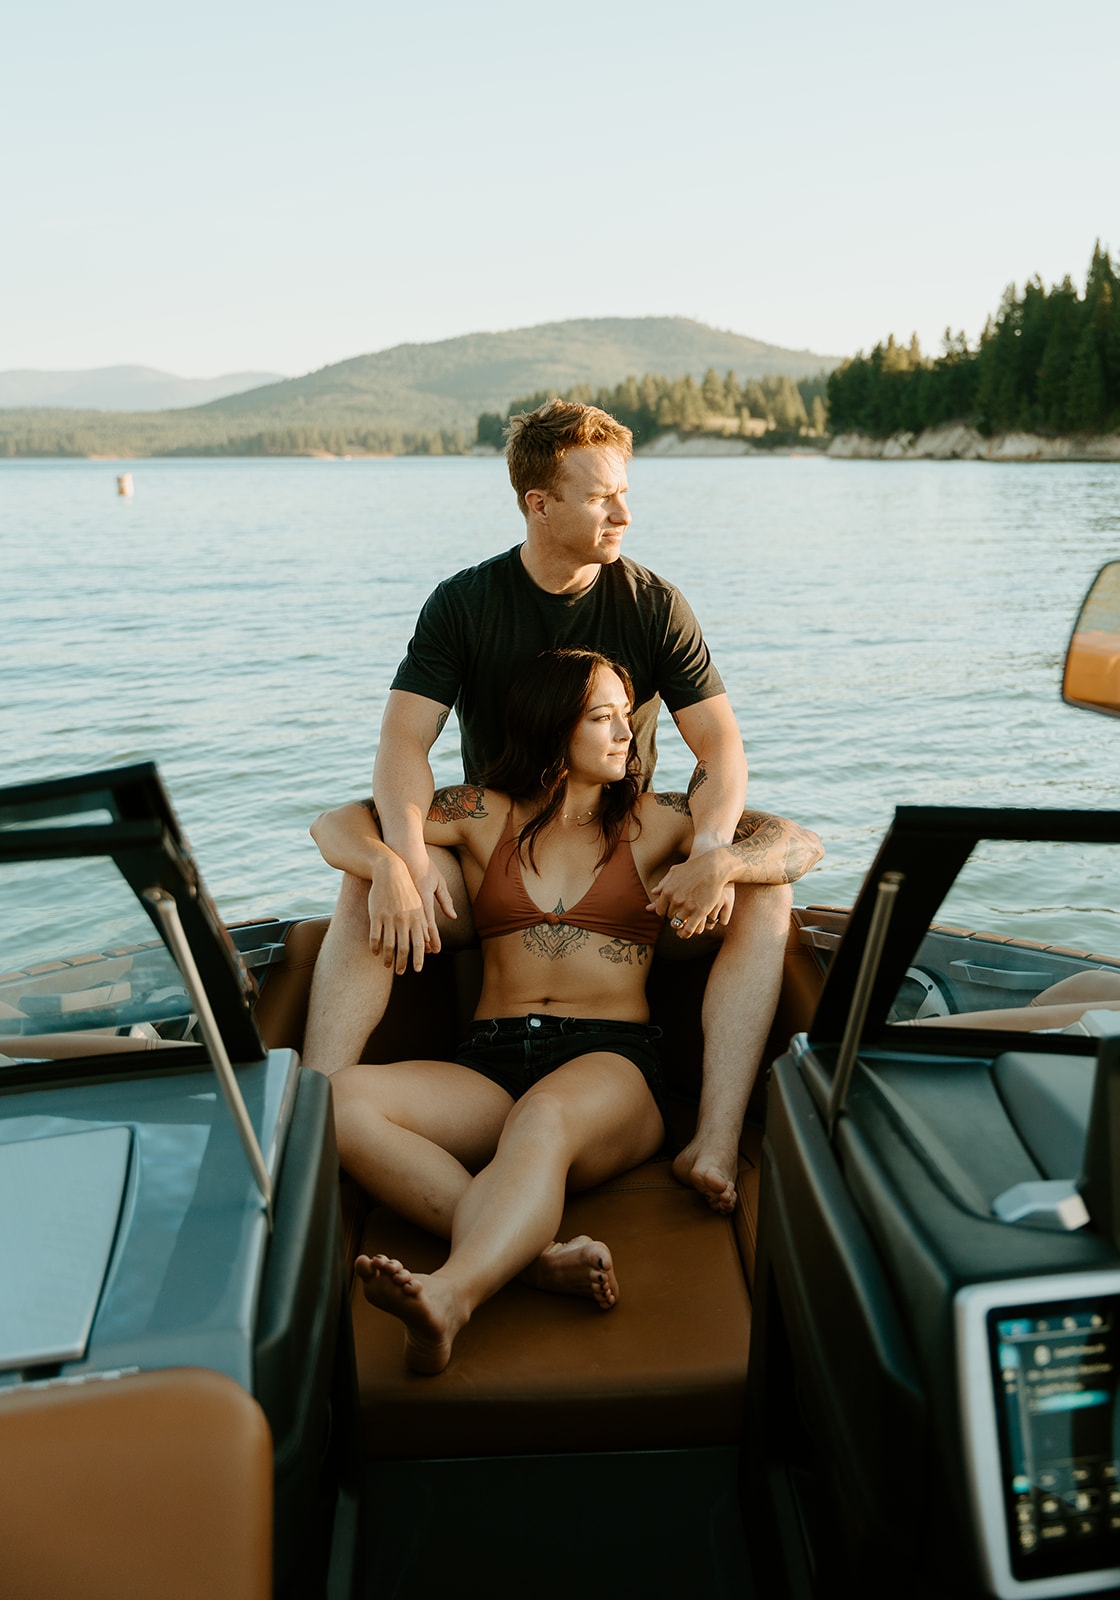 details of the malibu boat engagements on the water near truckee california